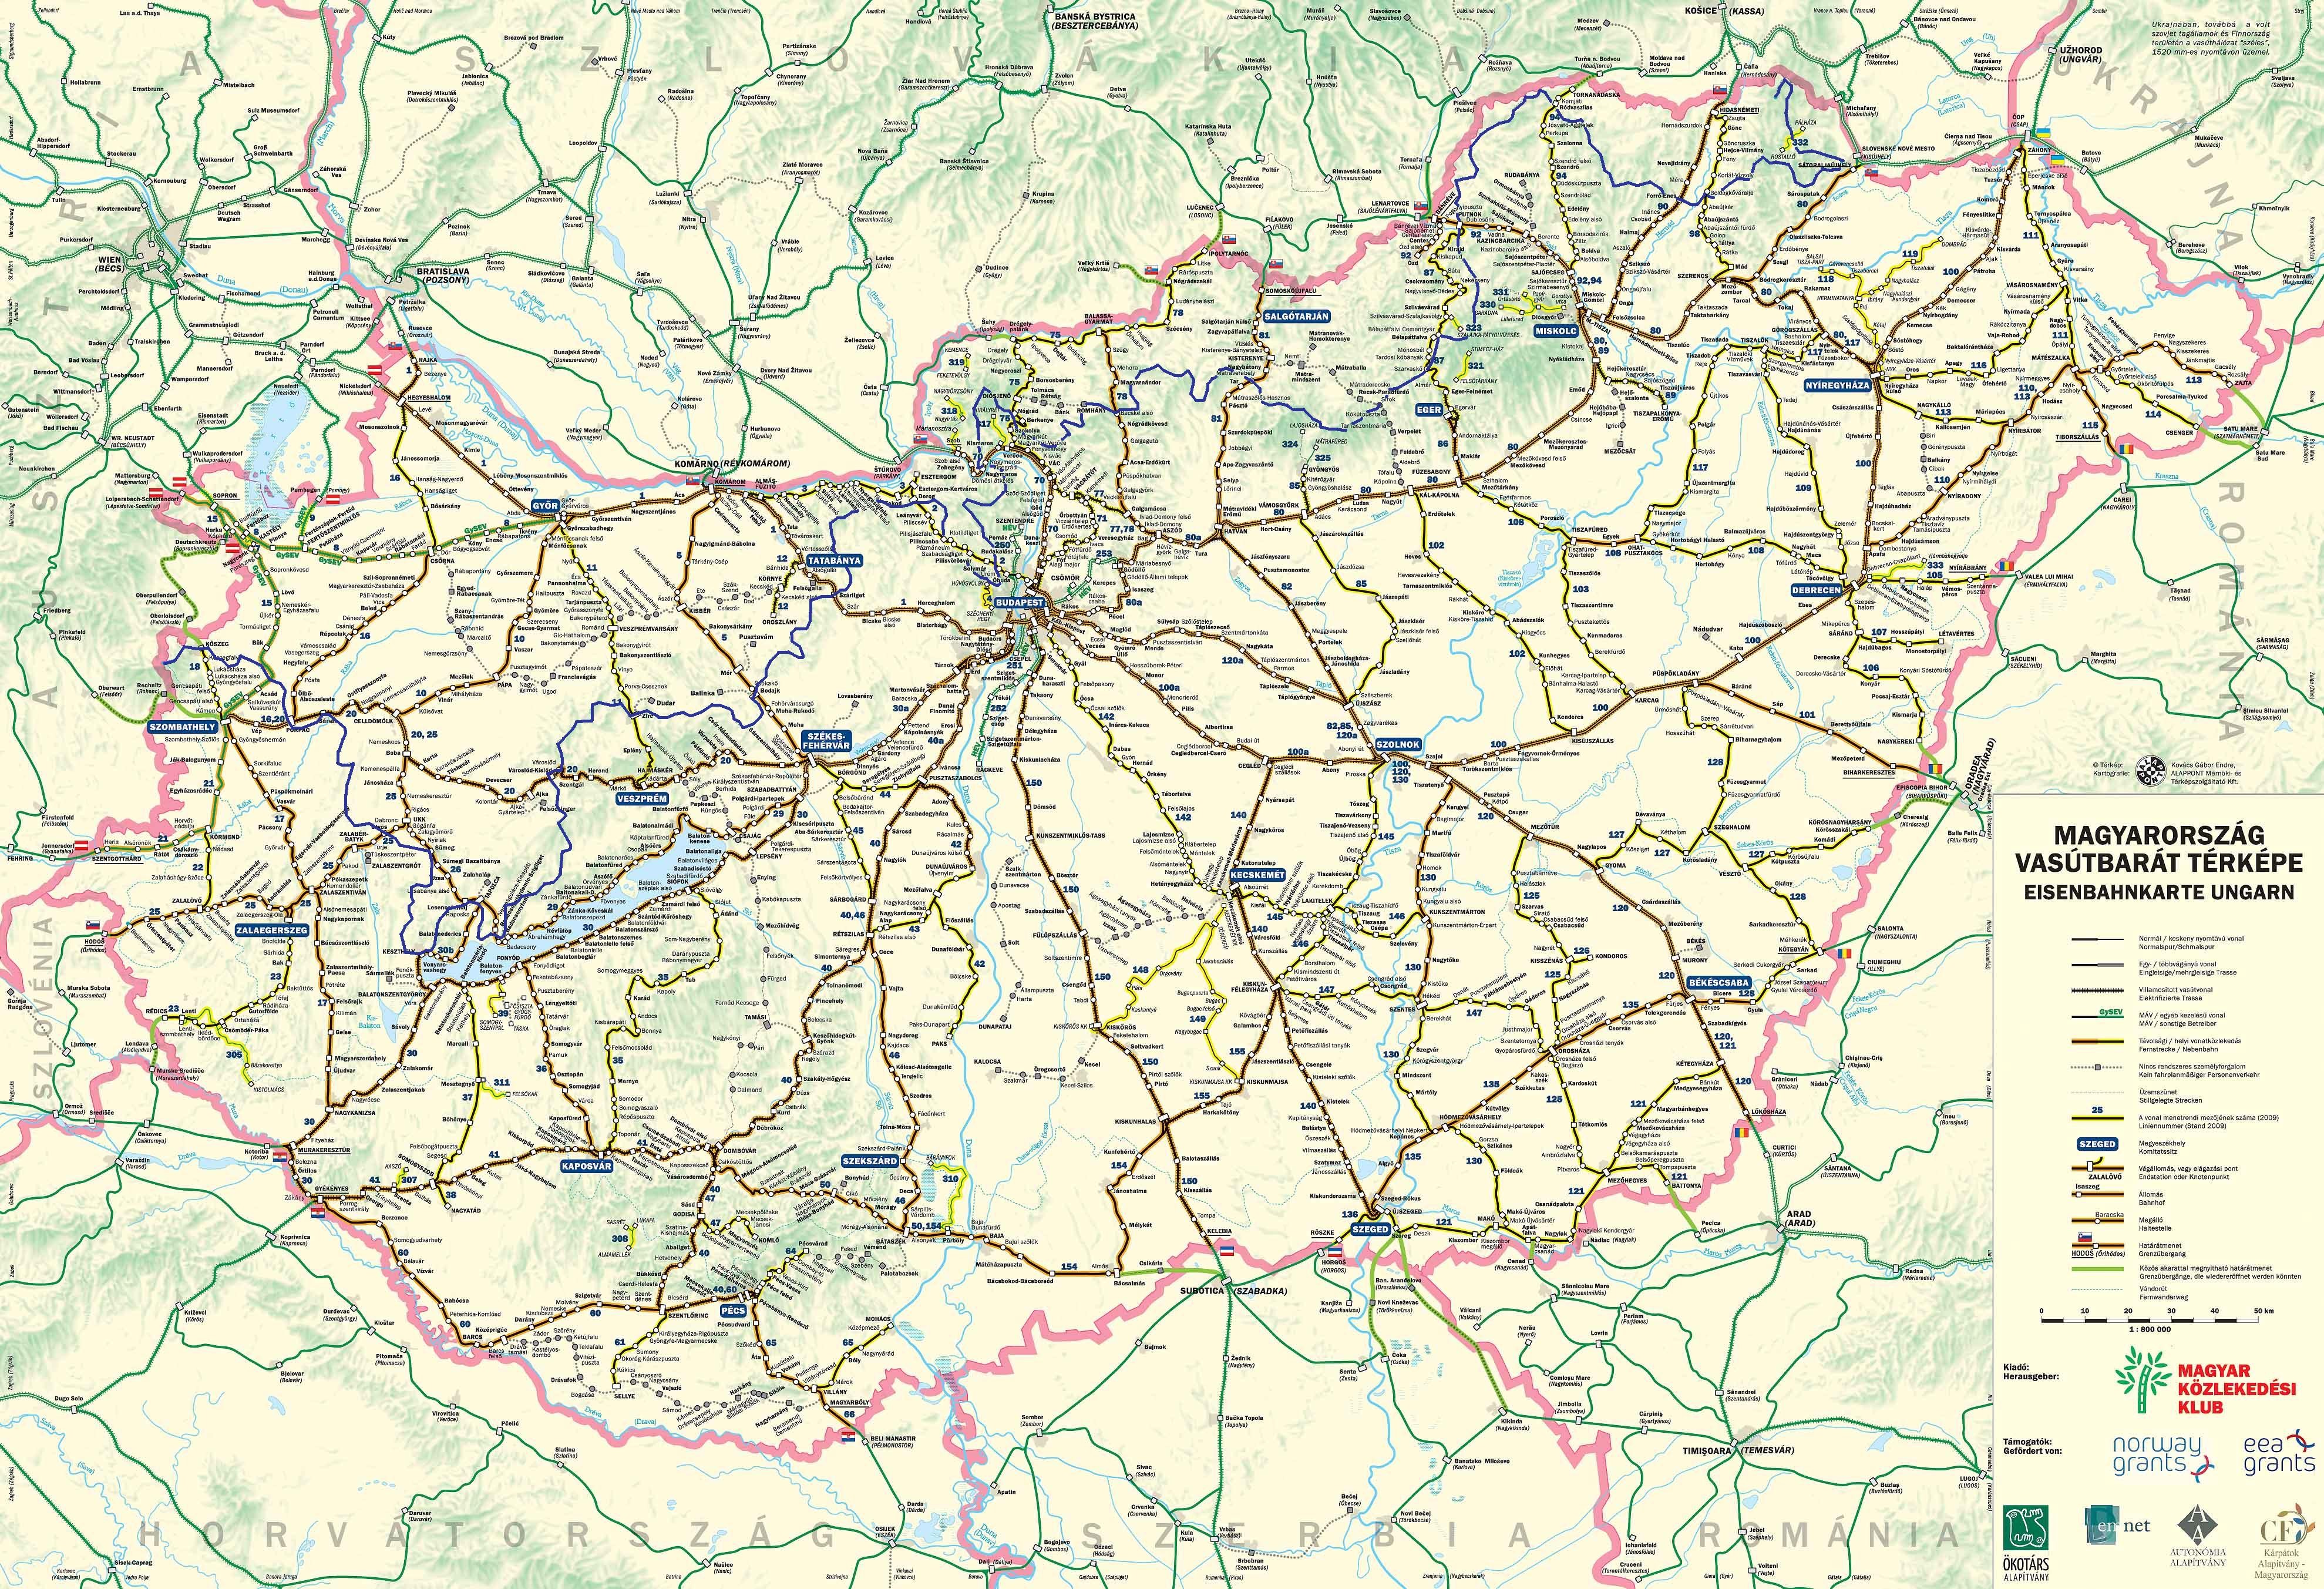 The Hungarian railway lines and the route of the National Blue Trail